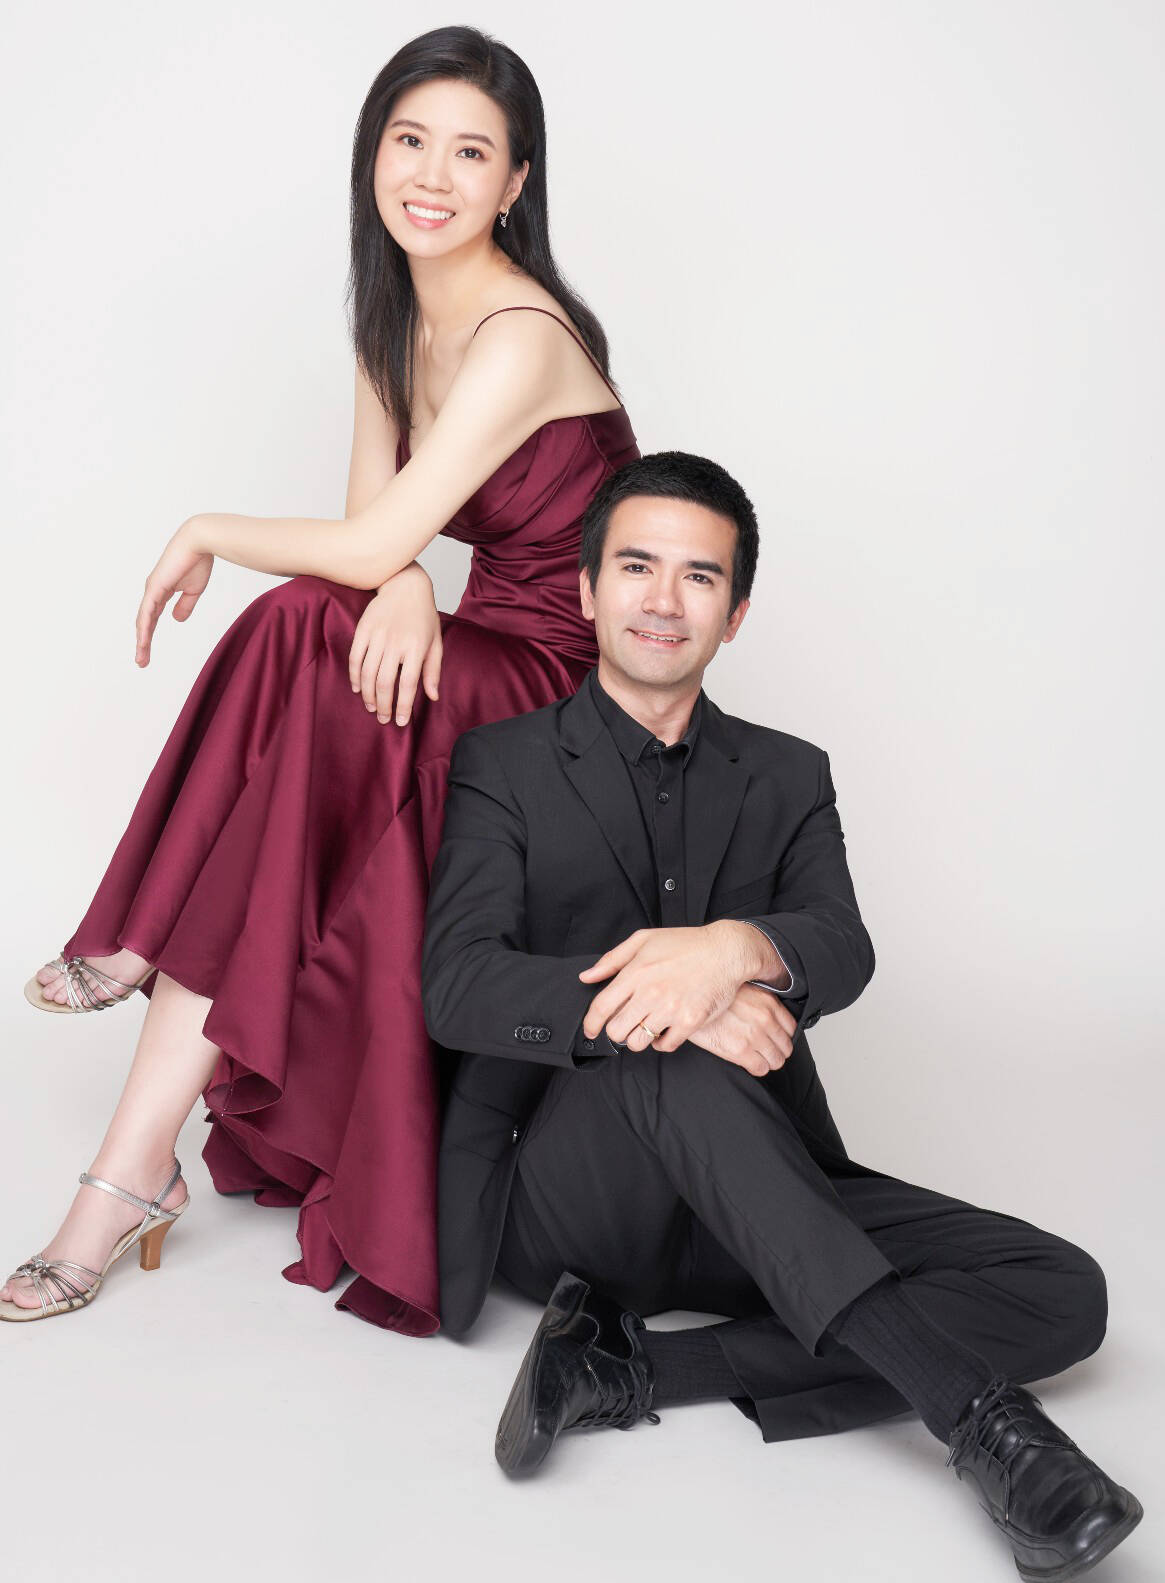 31828569_web1_230216-CHC-Chemainus-Classical-concerts-coming_3